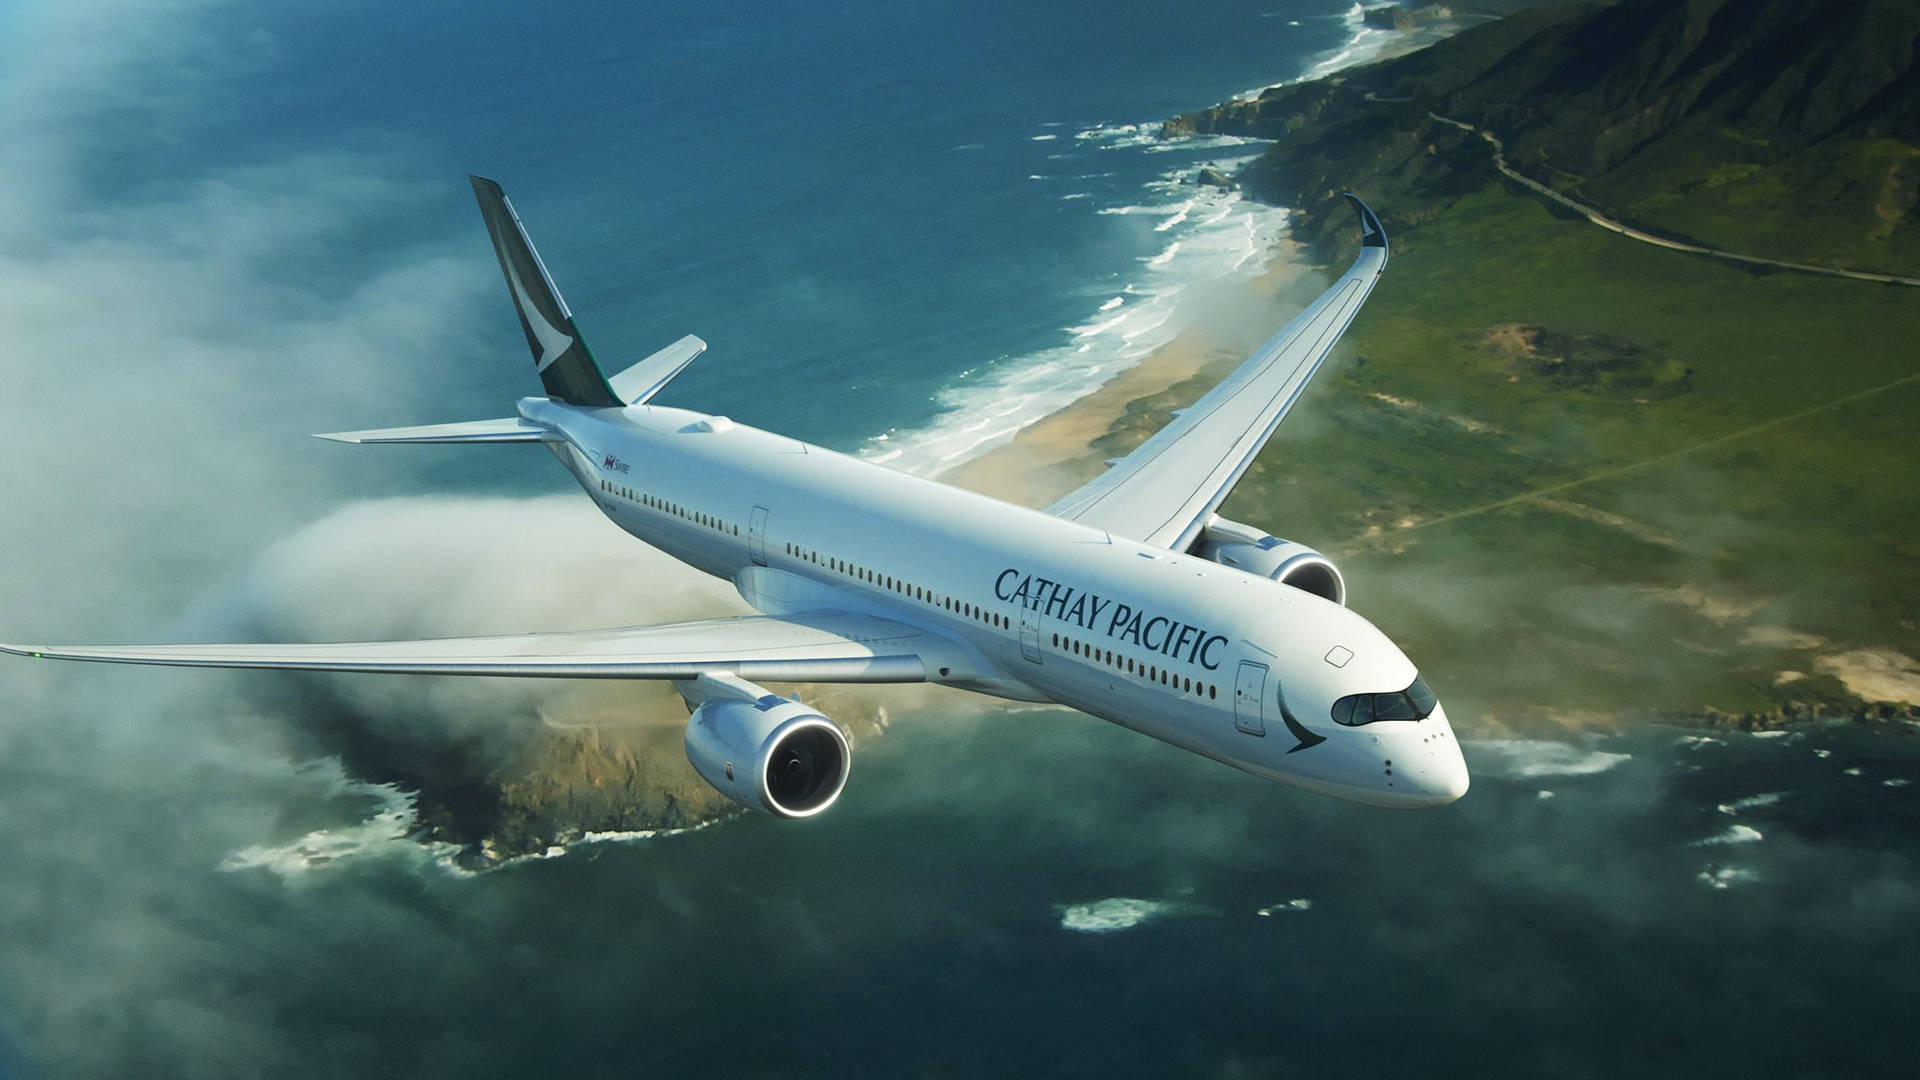 Cathay Pacific Wallpaper